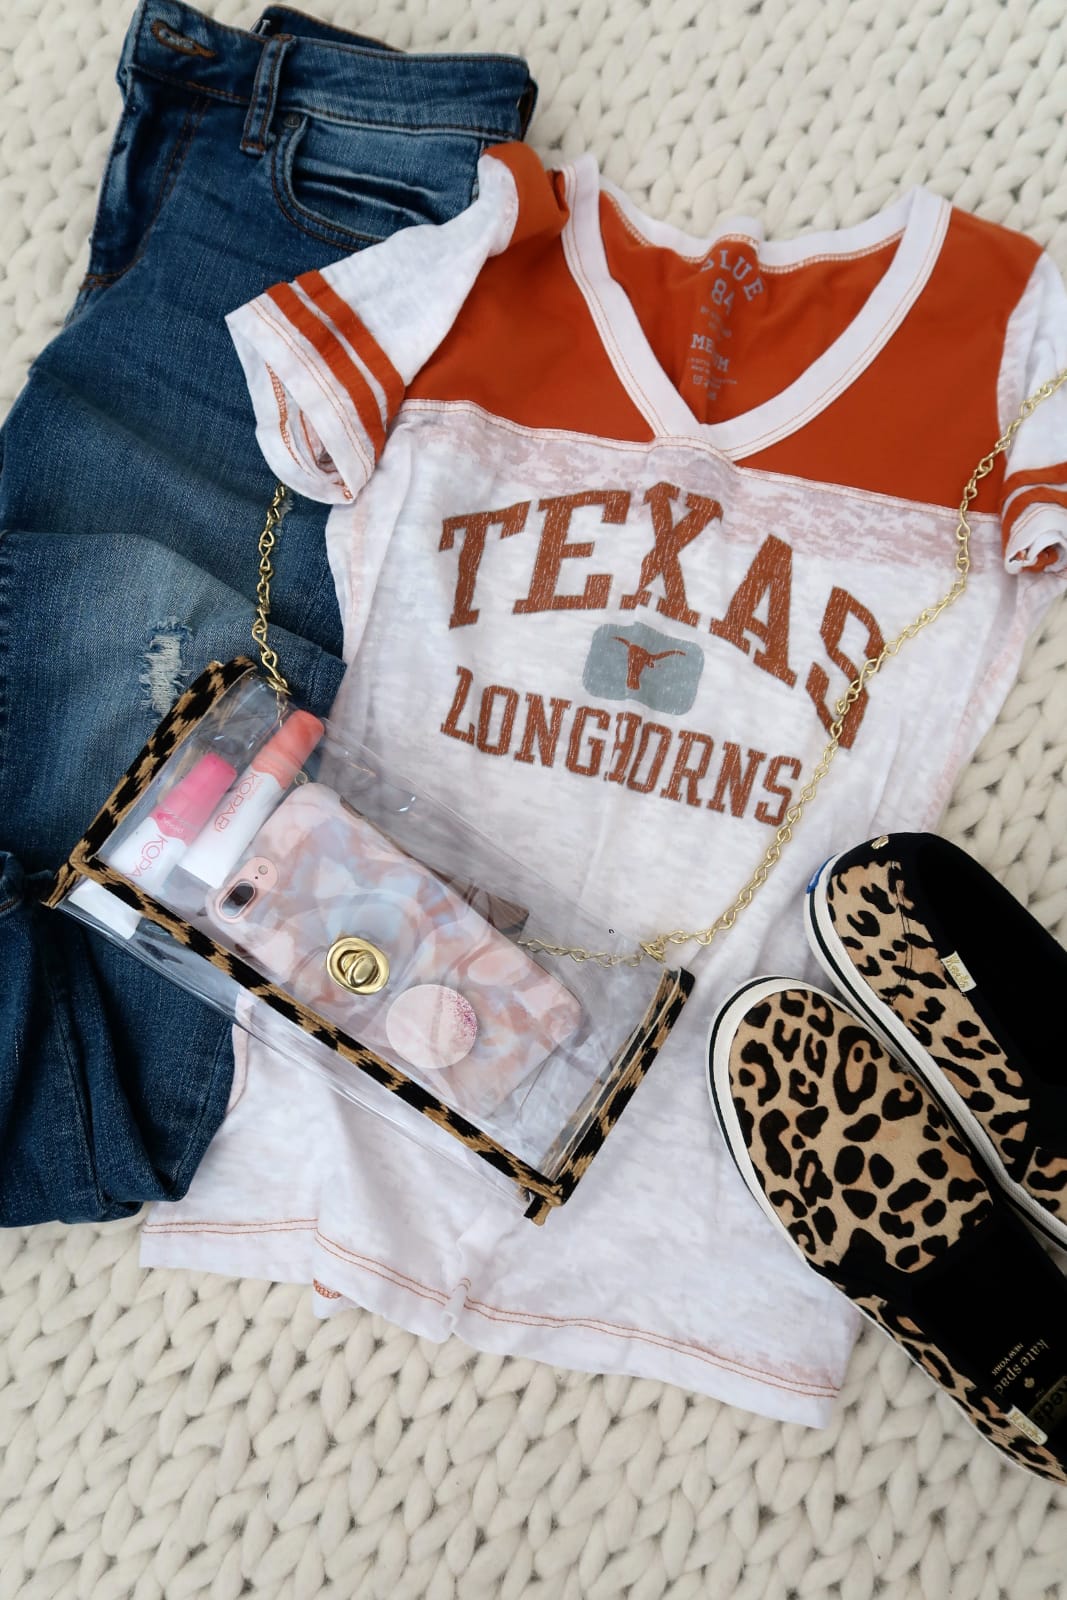 Cute Game Day outfit with stadium approved clear bag